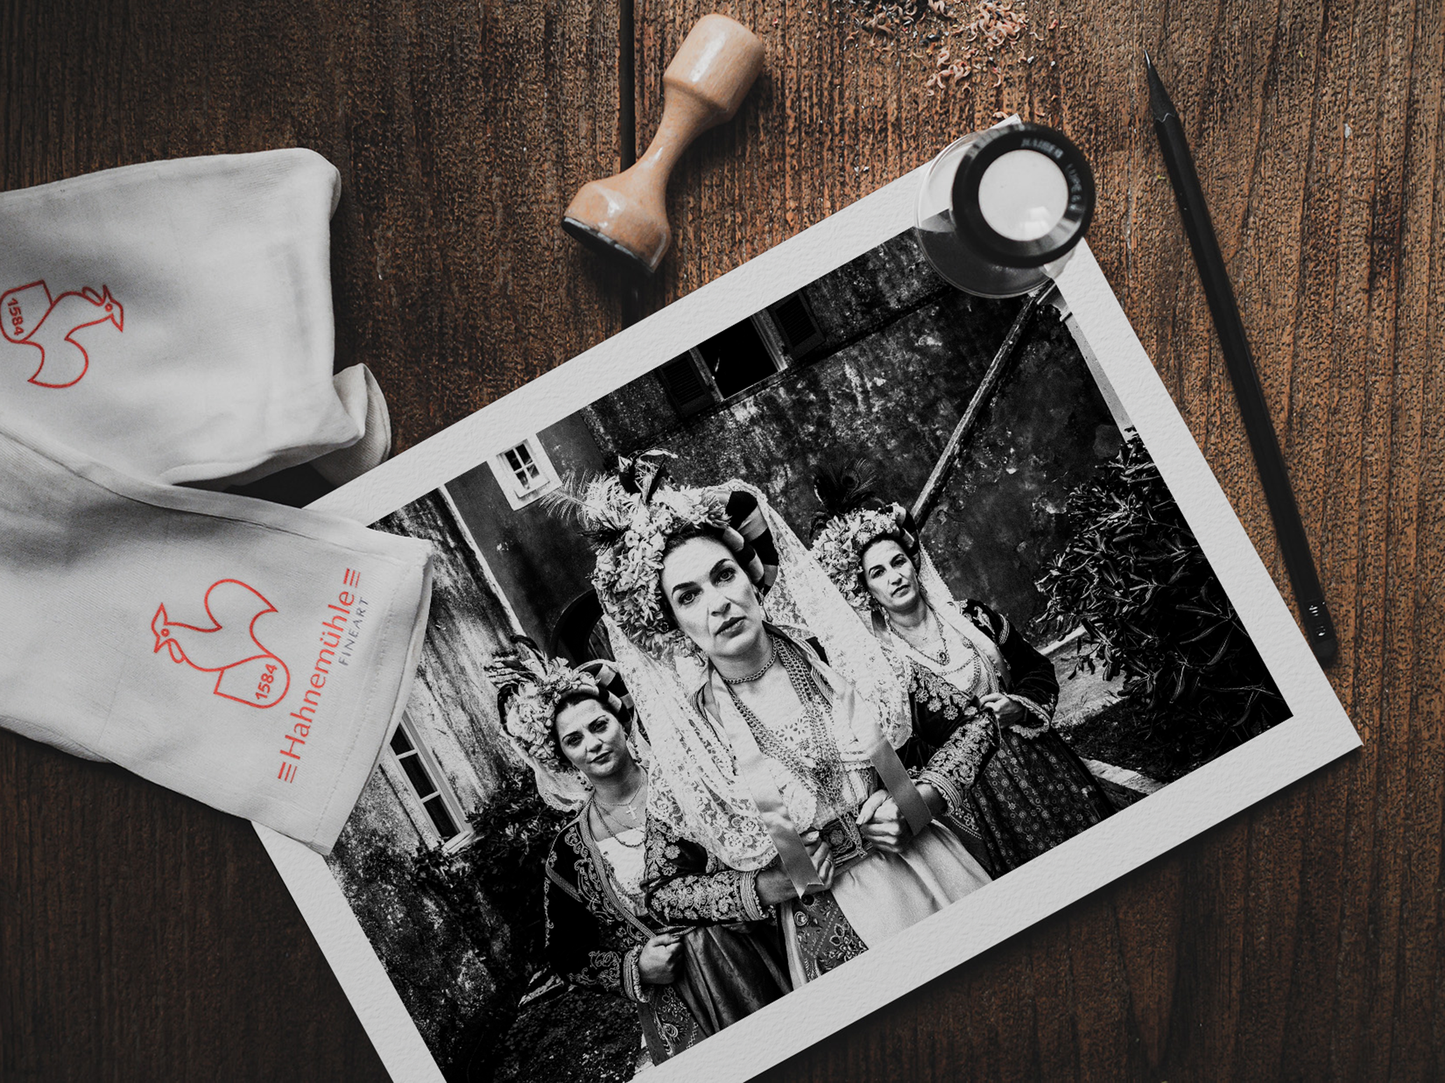 Black and White Photography Wall Art Greece | Costumes of central Corfu island at a local village Ionian Sea by George Tatakis - photo print on table